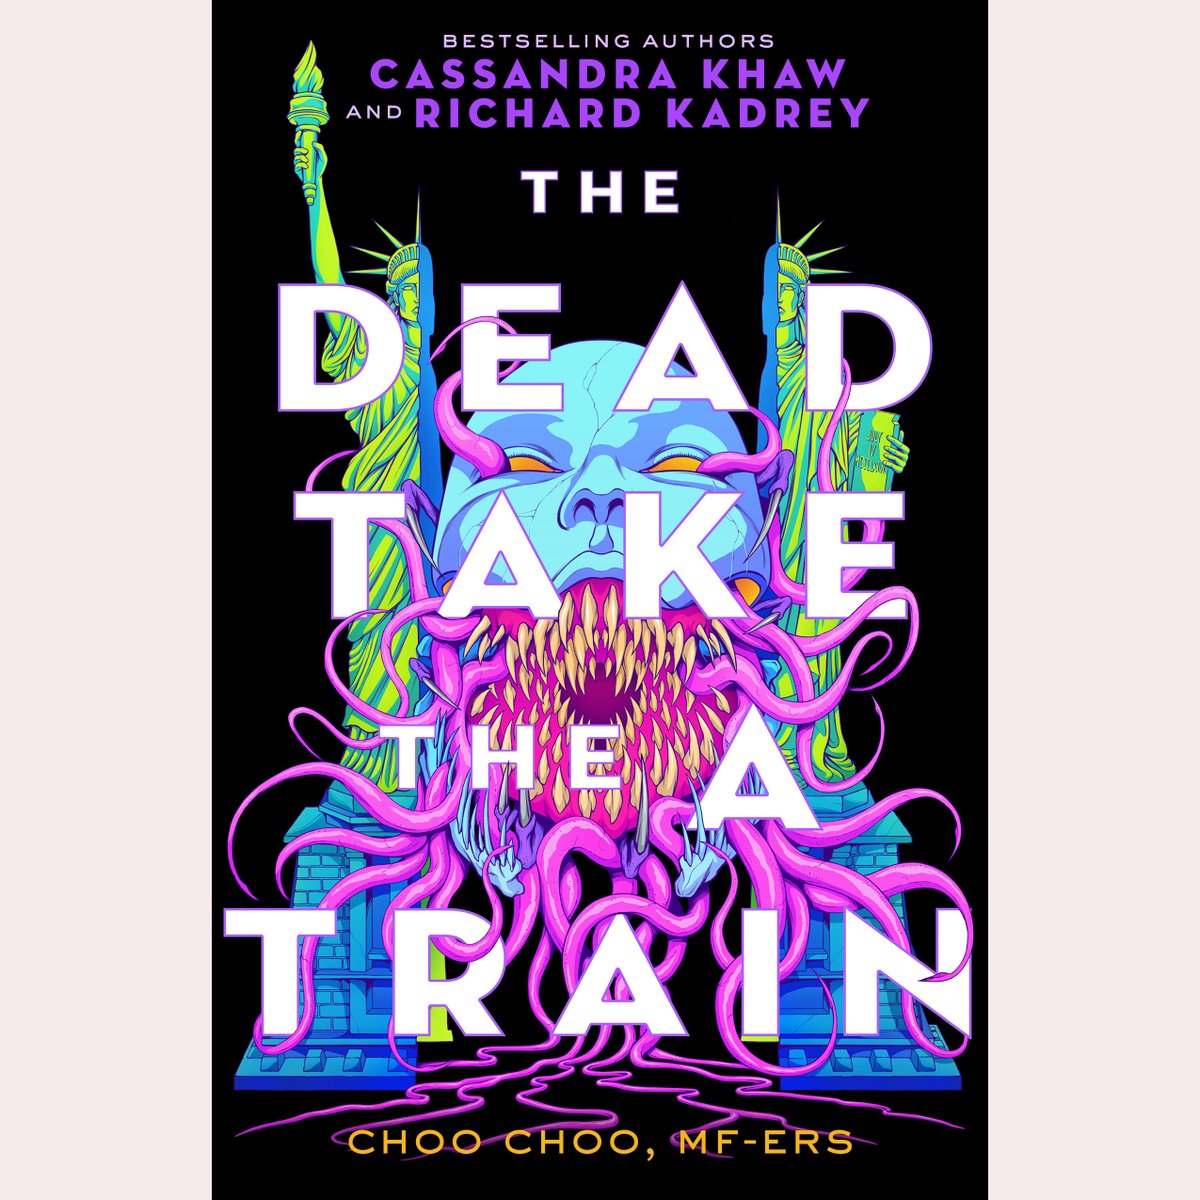 Barnes & Noble is offering 25% off preorders of the novel @casskhaw and I wrote together, THE DEAD TAKE THE A TRAIN. Just use the code PREORDER25 when you check out.
#bnpreorder25